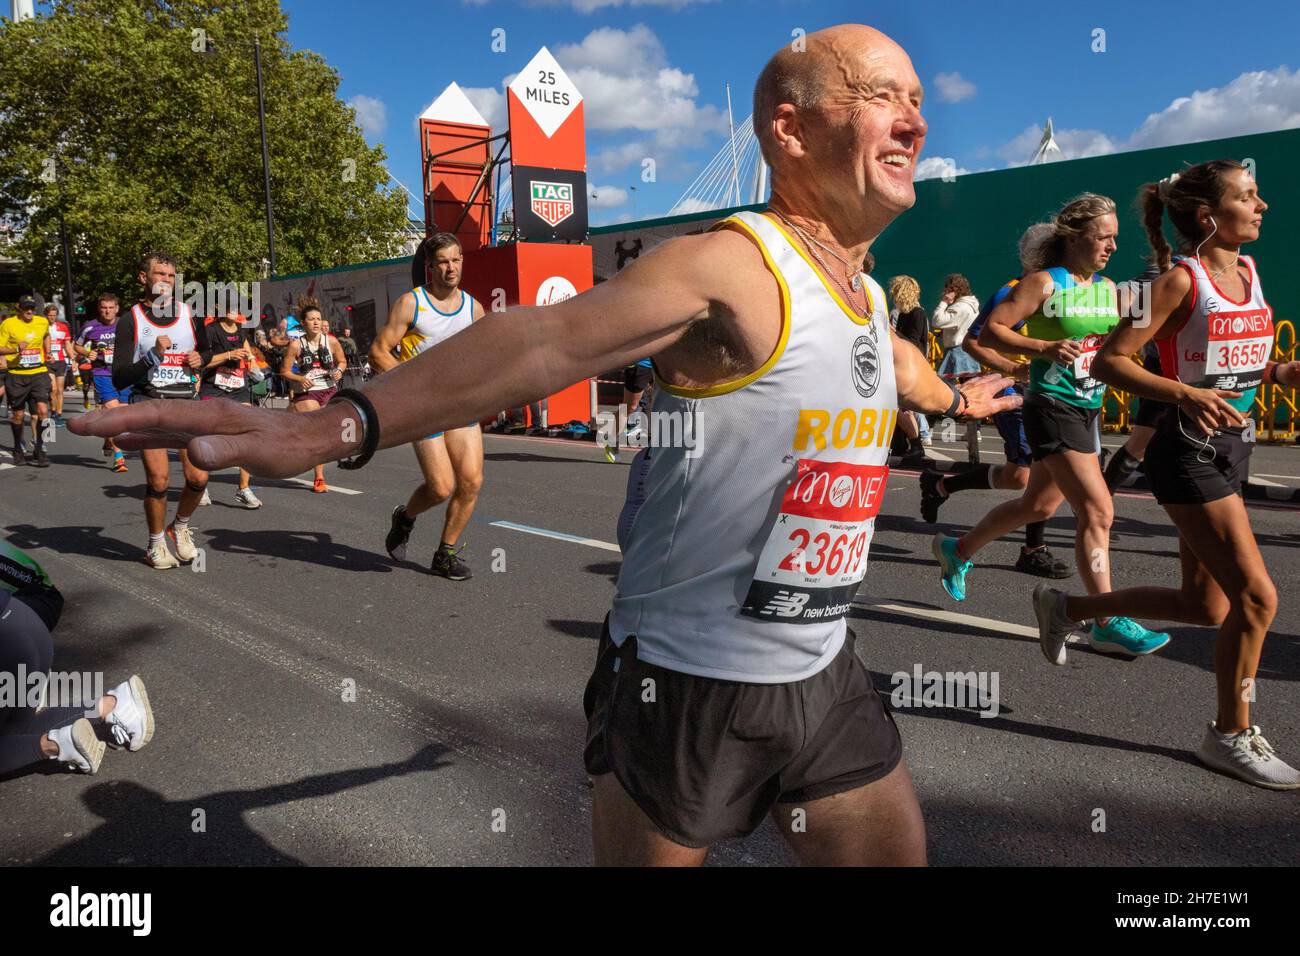 Man running with arms held out, Virgin Money London Marathon 2021 at the 25 mile point, Victoria Embankment. Stock Photo